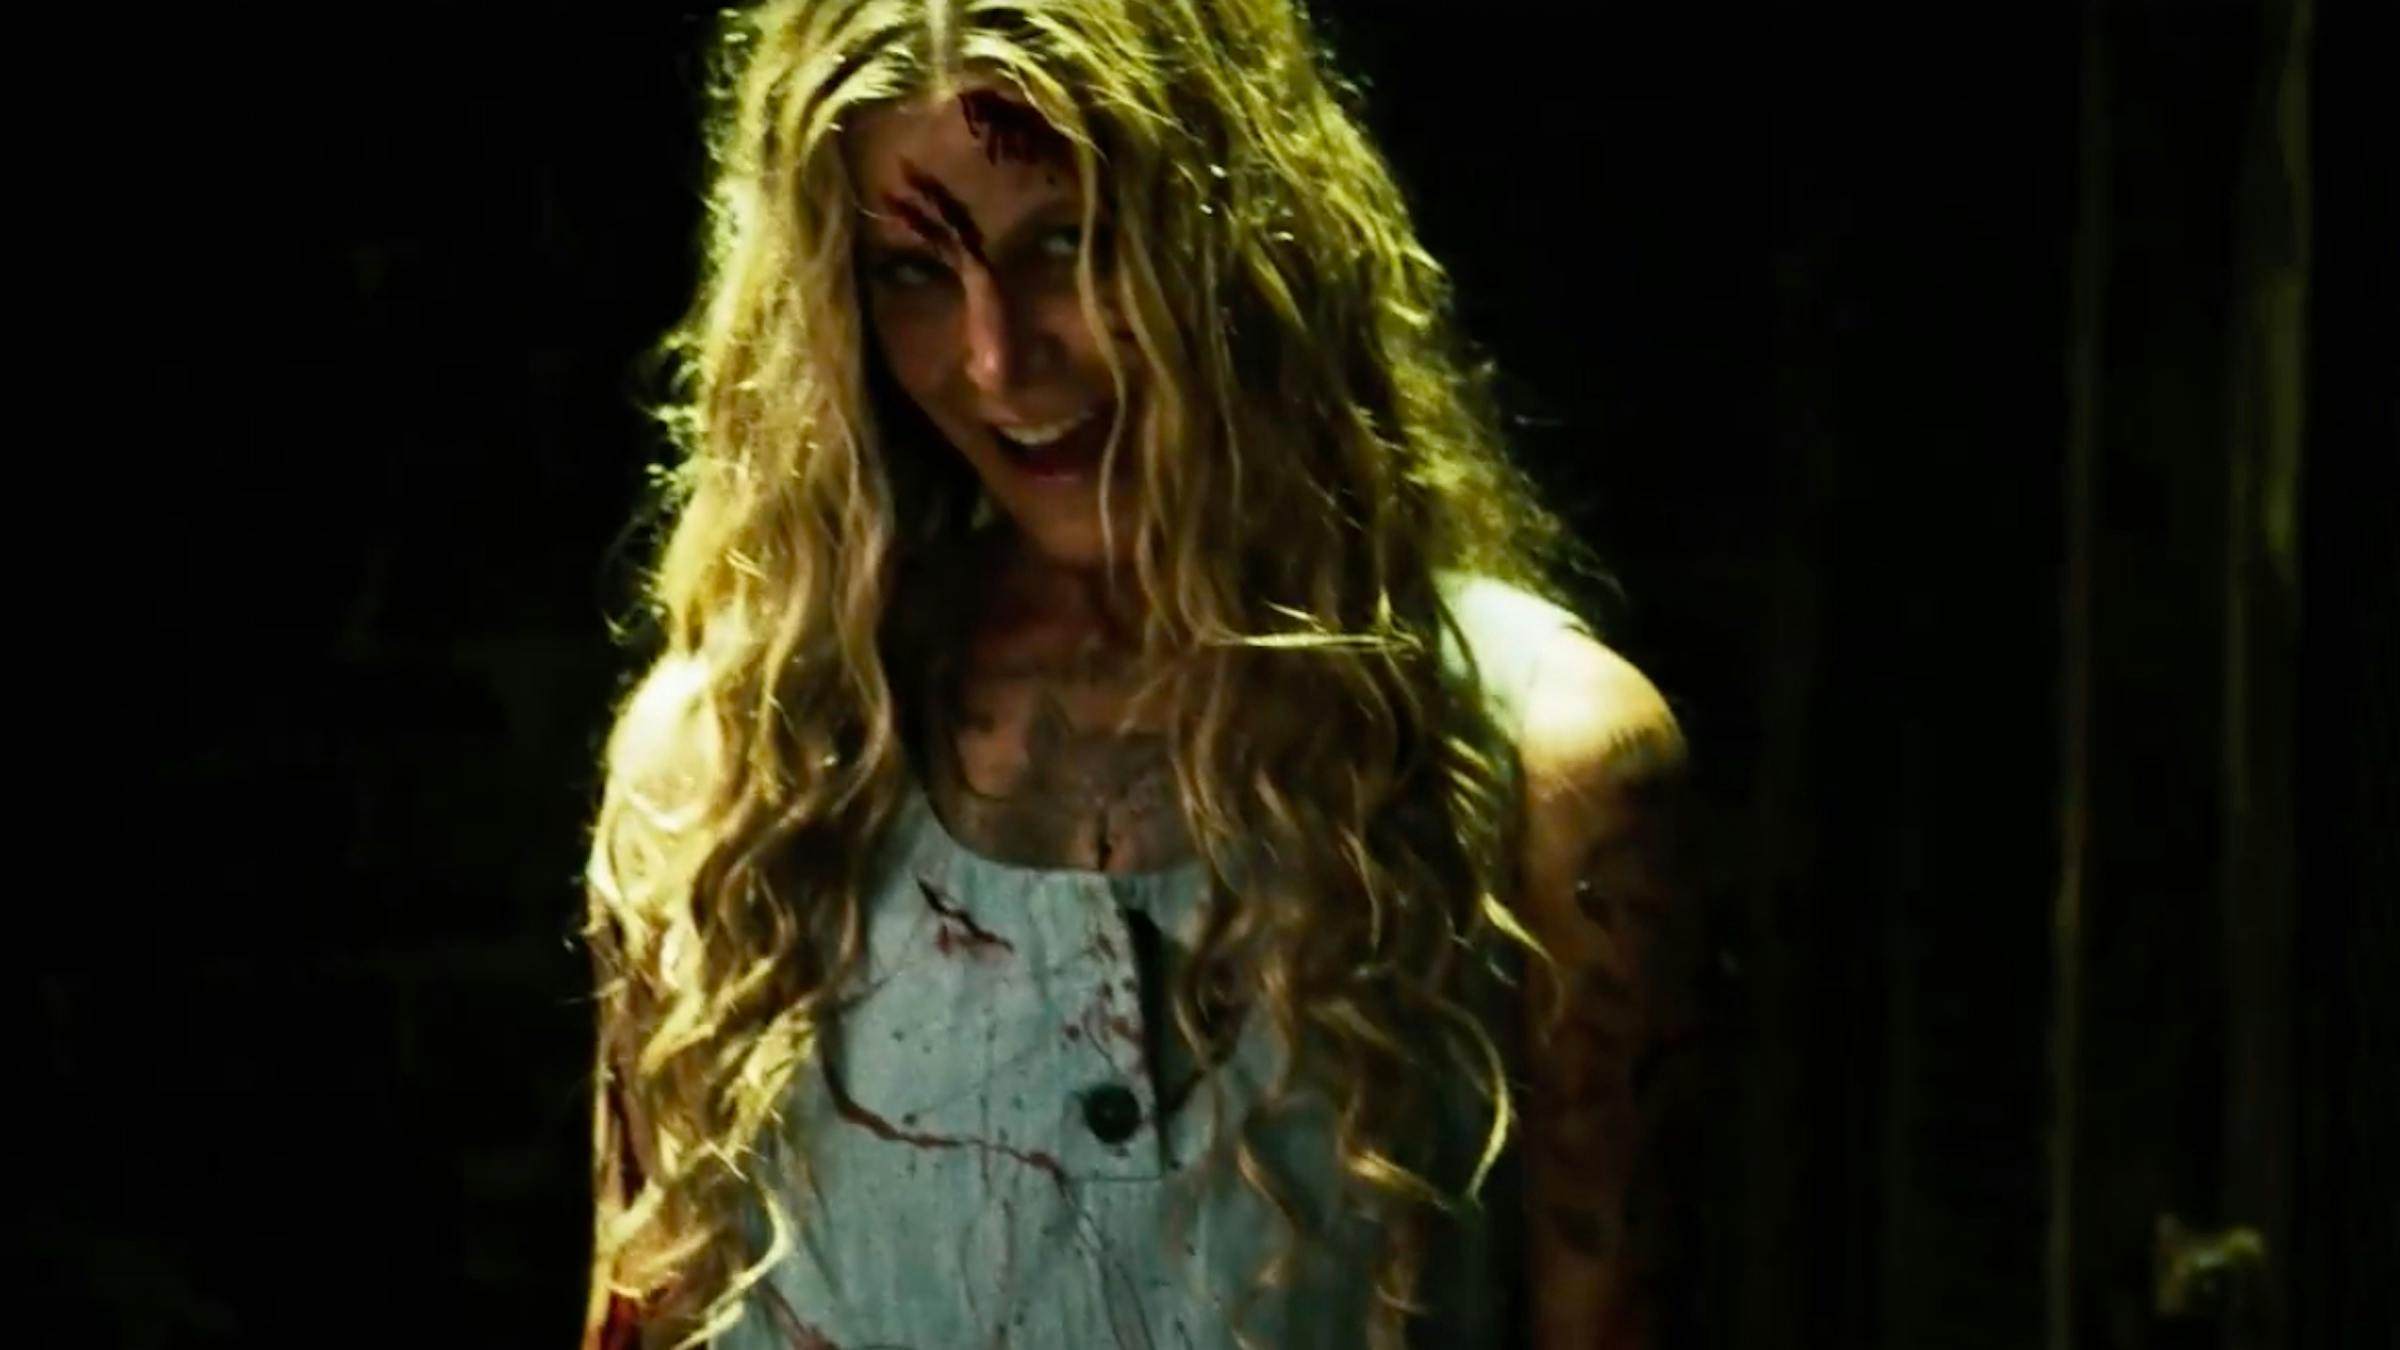 Rob Zombie Releases Full Trailer For 3 From Hell